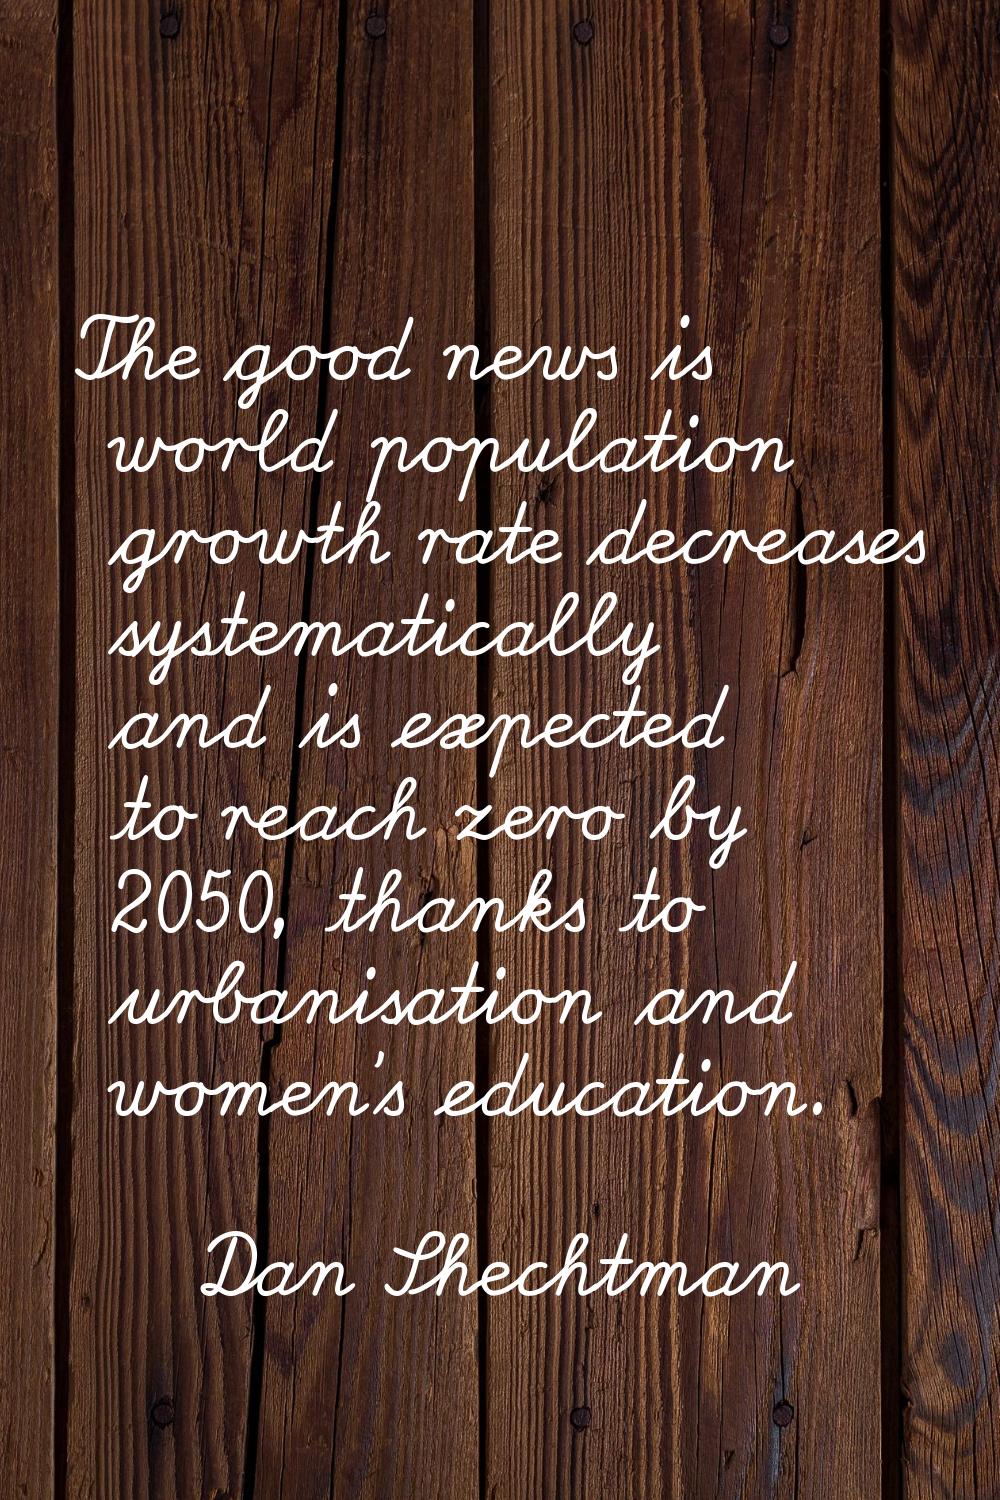 The good news is world population growth rate decreases systematically and is expected to reach zer